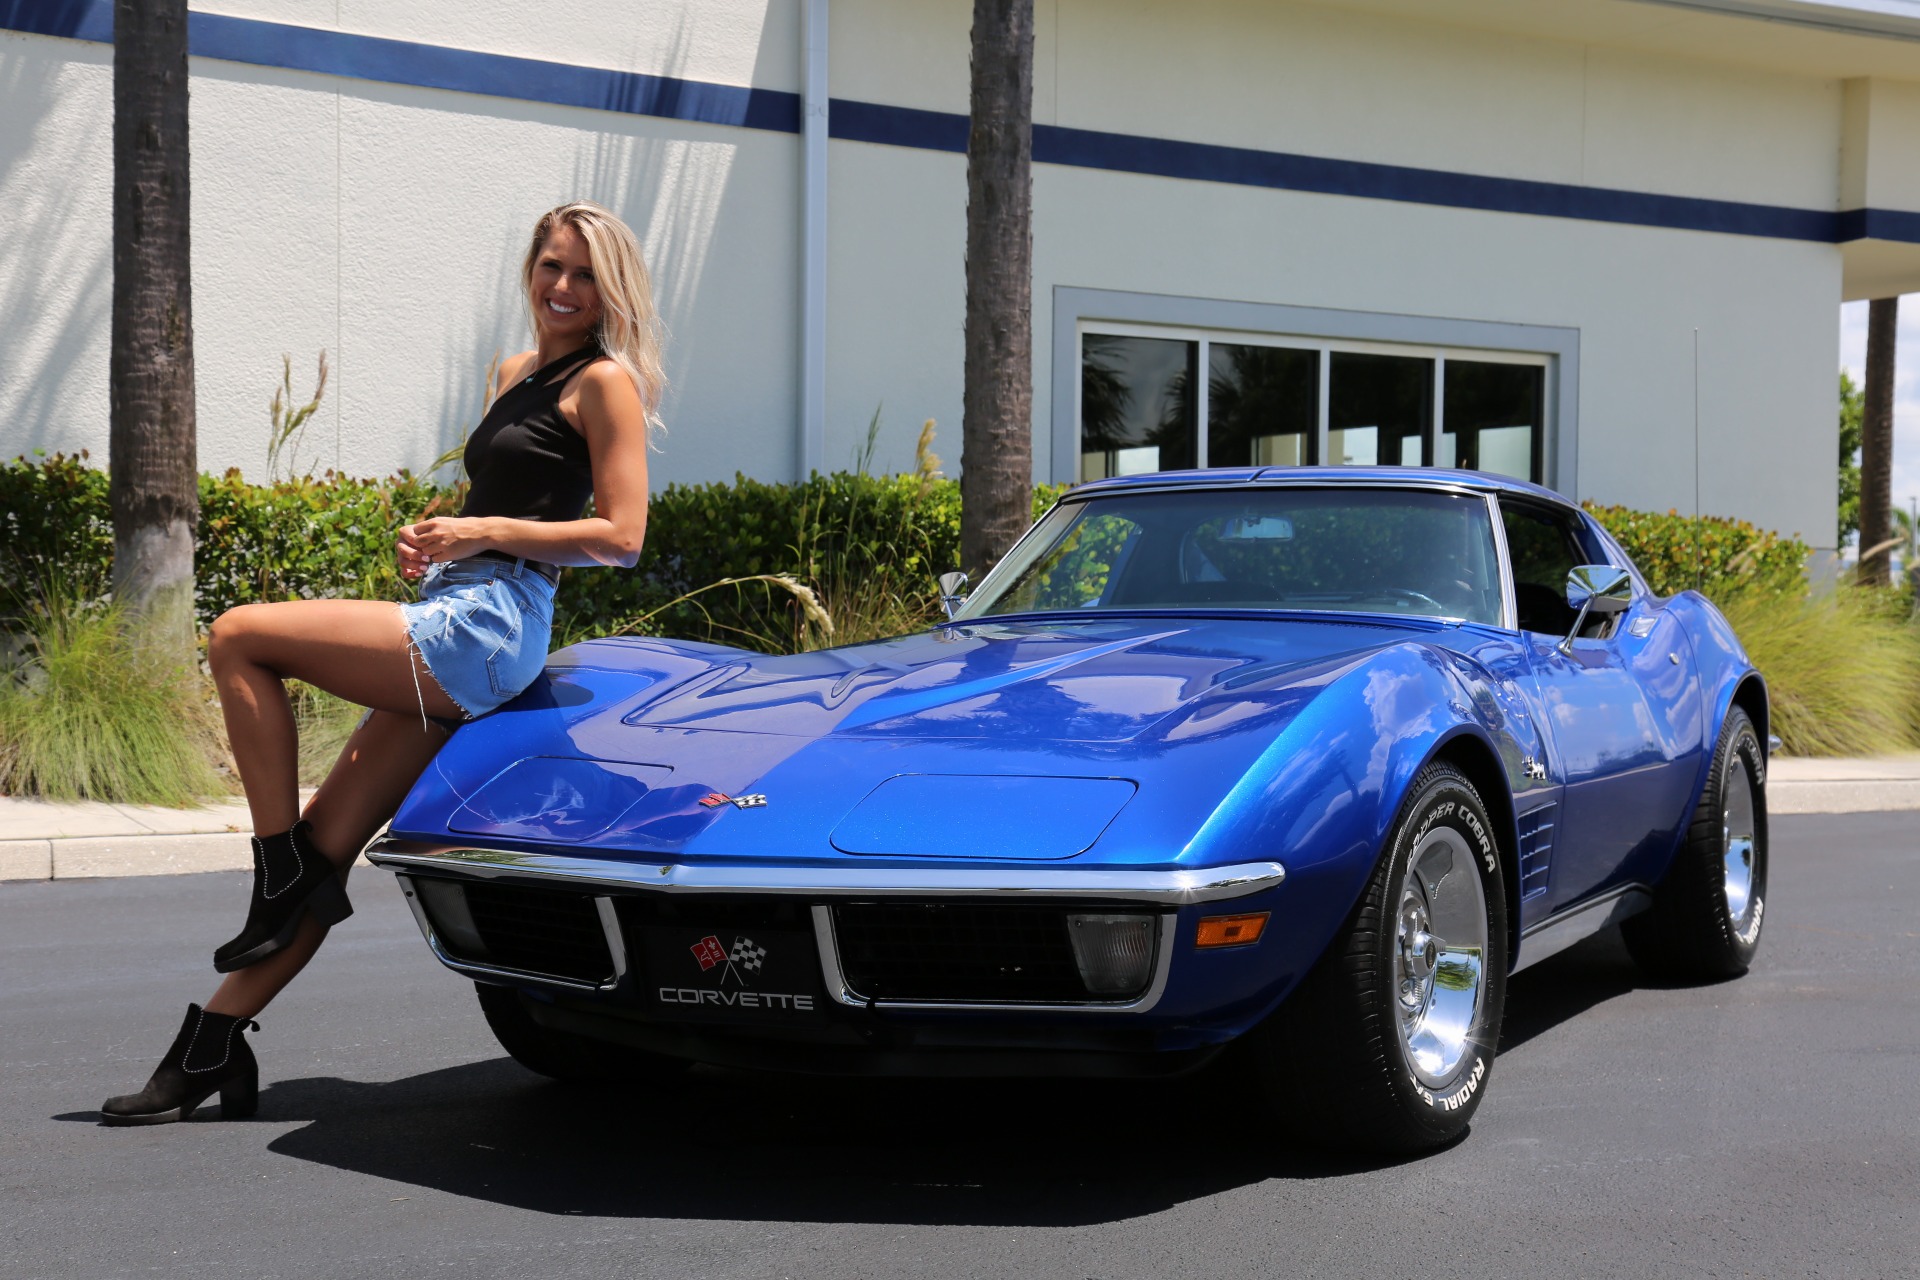 Used 1970 Chevrolet Corvette Stingray for sale Sold at Muscle Cars for Sale Inc. in Fort Myers FL 33912 1